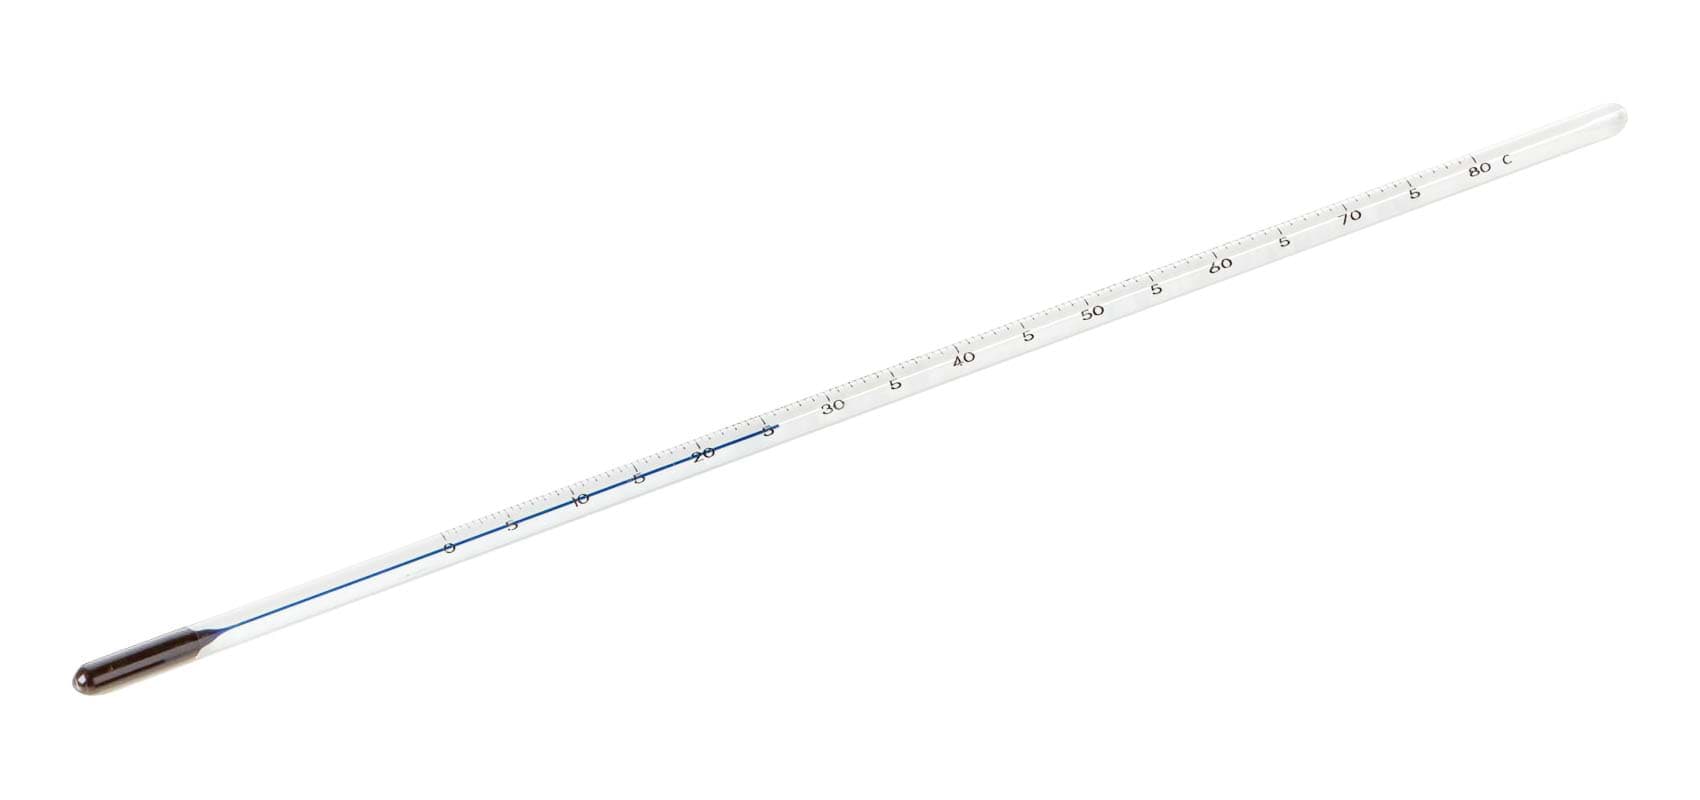 Ertco 63F ASTM Glass Thermometer; Range 18 - 89°F; Total Immersion; 379-mm  Total Length from Cole-Parmer Canada